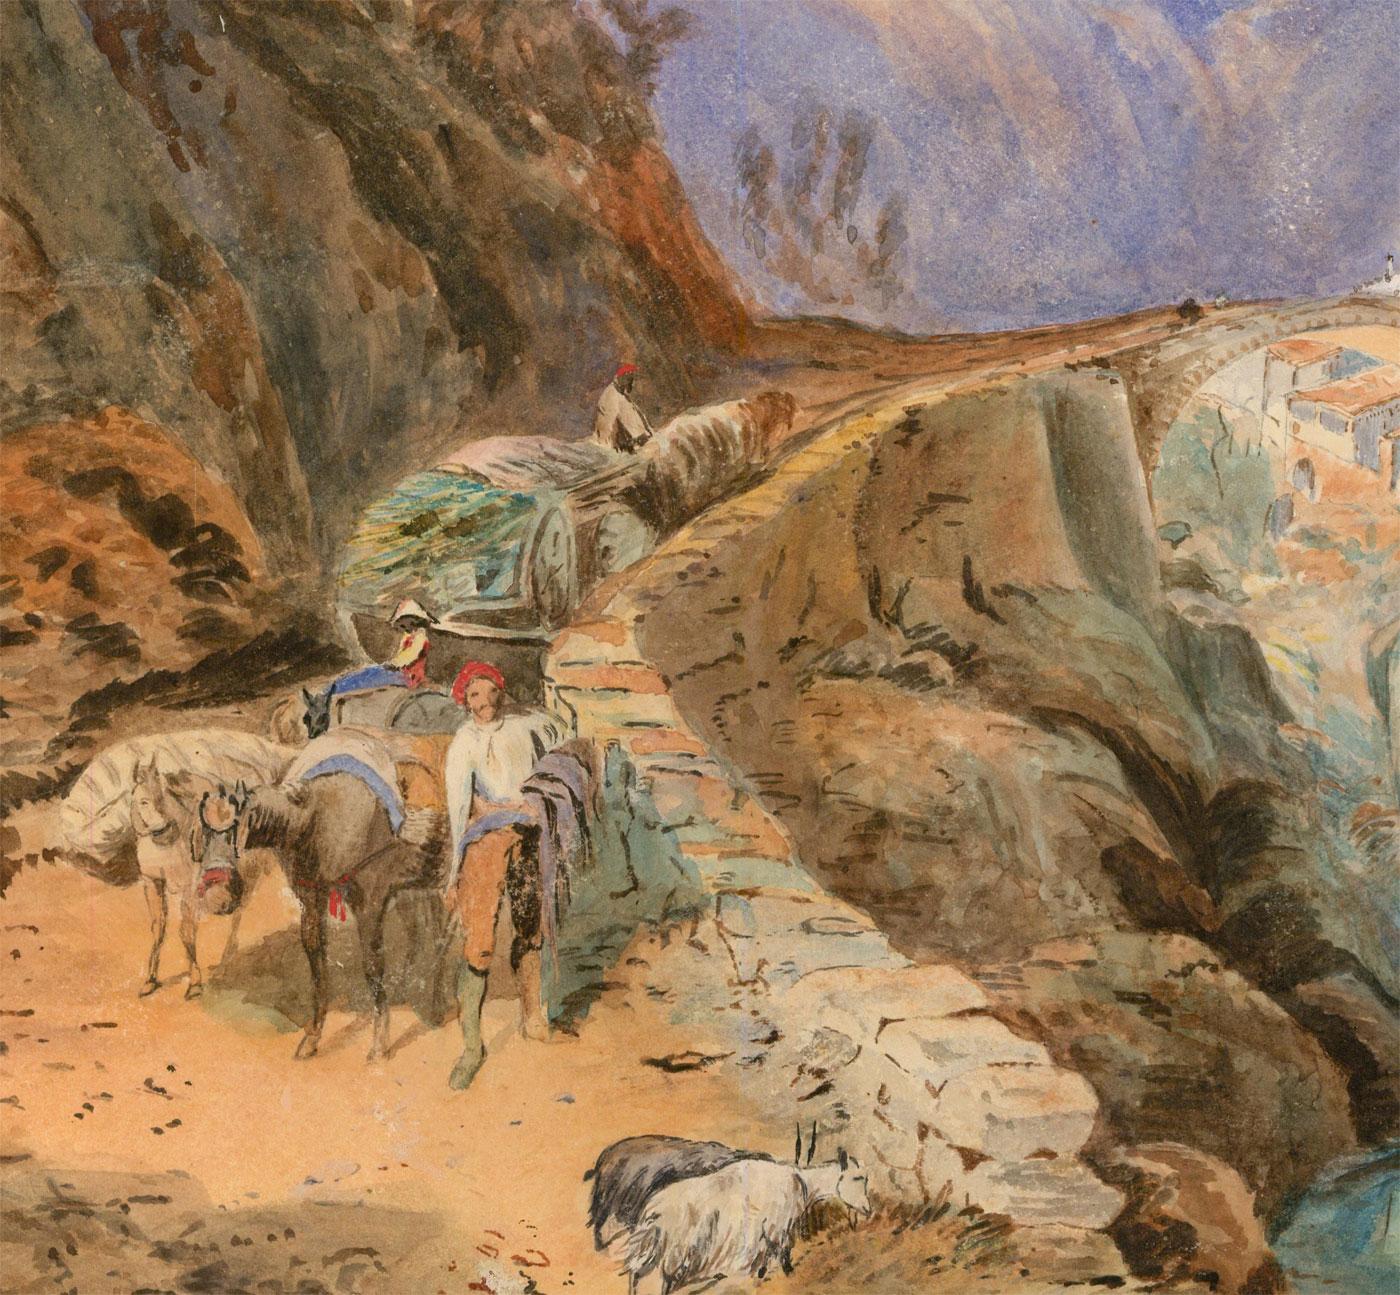 A finely detailed 19th century watercolour depicting an Italian mountain town or village, with figures leading donkeys over an ancient stone bridge. The manner and handling of the scene is very similar the work of Thomas Charles Leeson Rowbotham